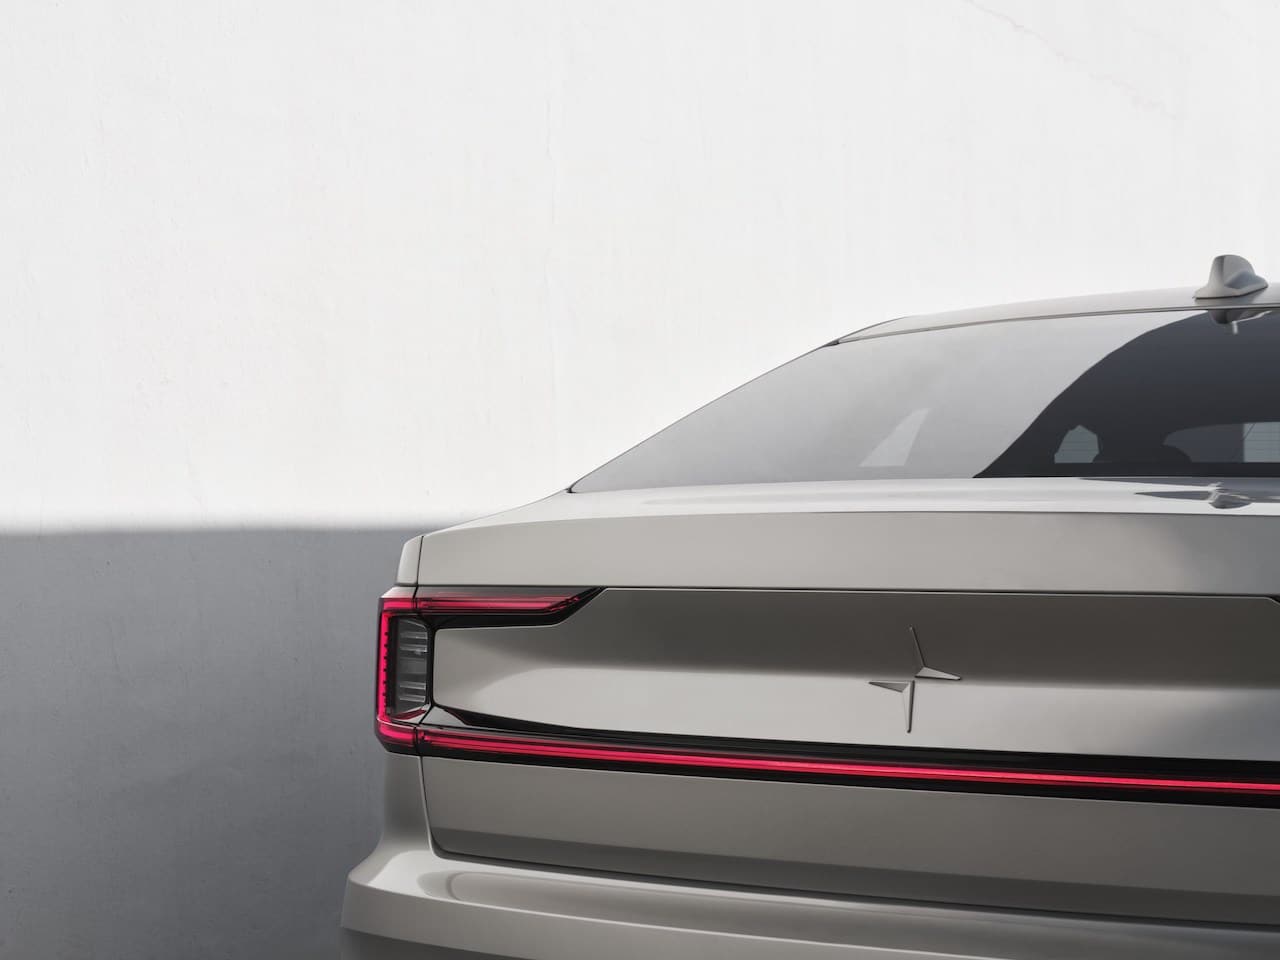 Polestar 2 off to strong start in South Korea with over 4,000 reservations in one week